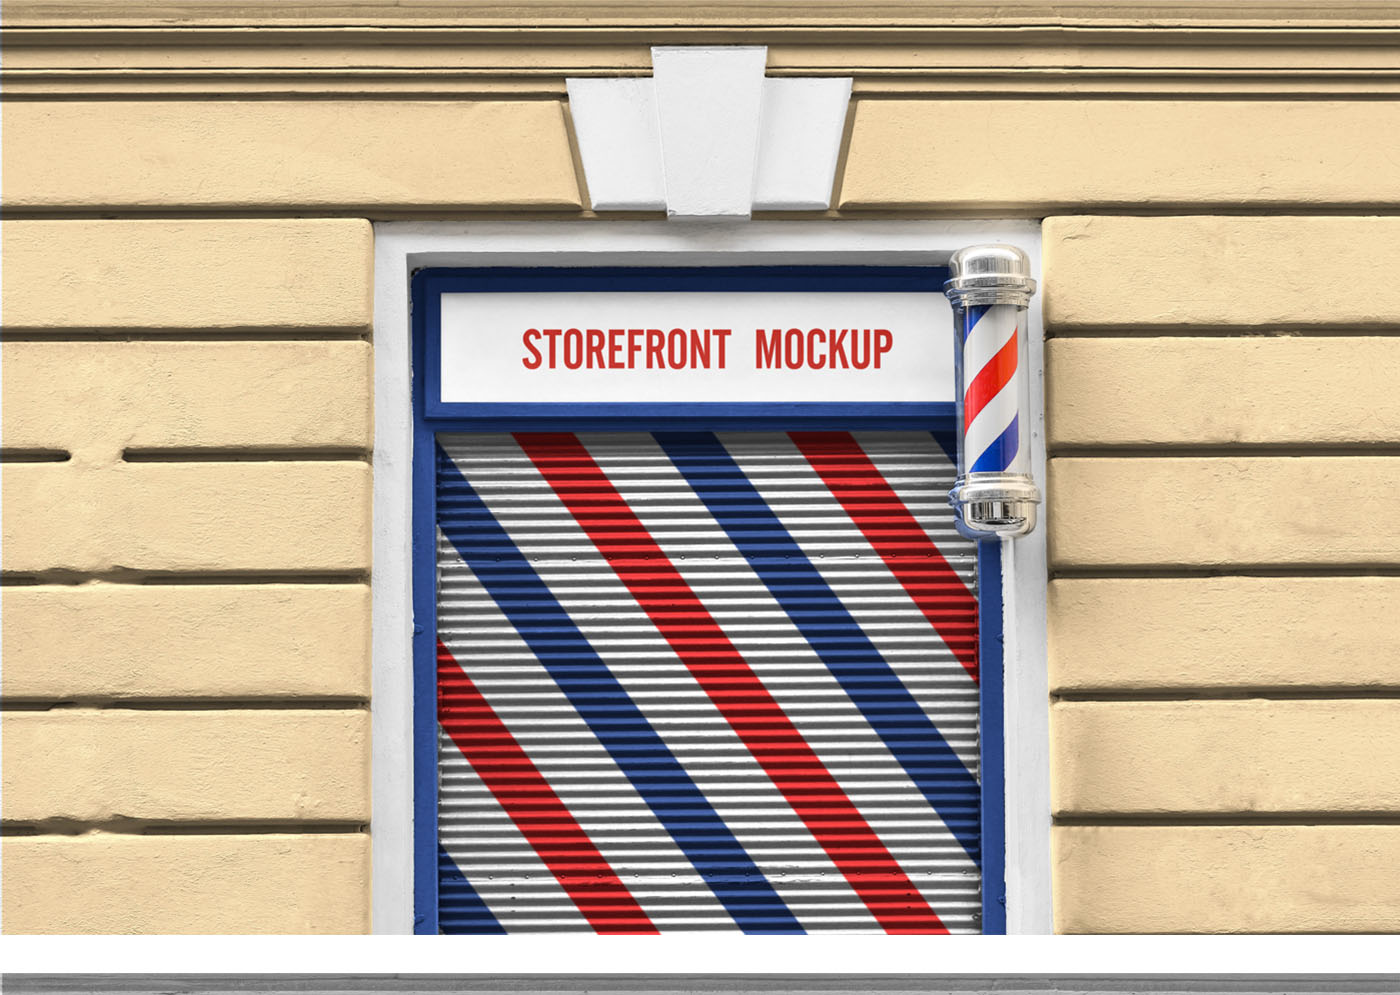 Download 40+ Free Facades and Storefronts Mockups in PSD & Premium Version! | Free PSD Templates